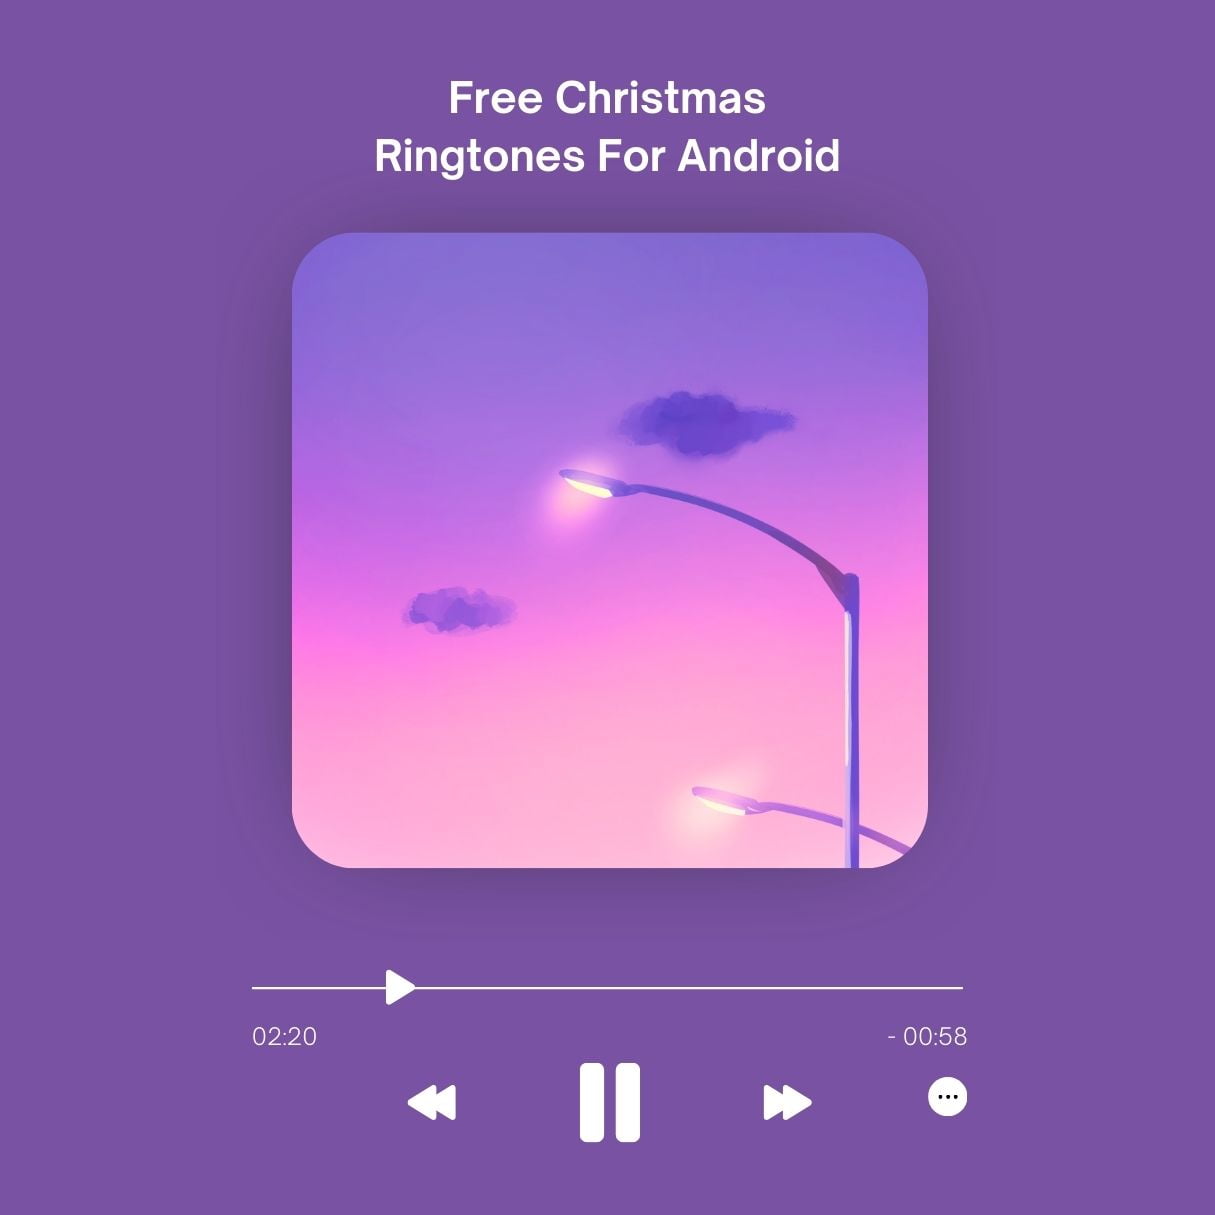 Free Christmas Ringtones For Android